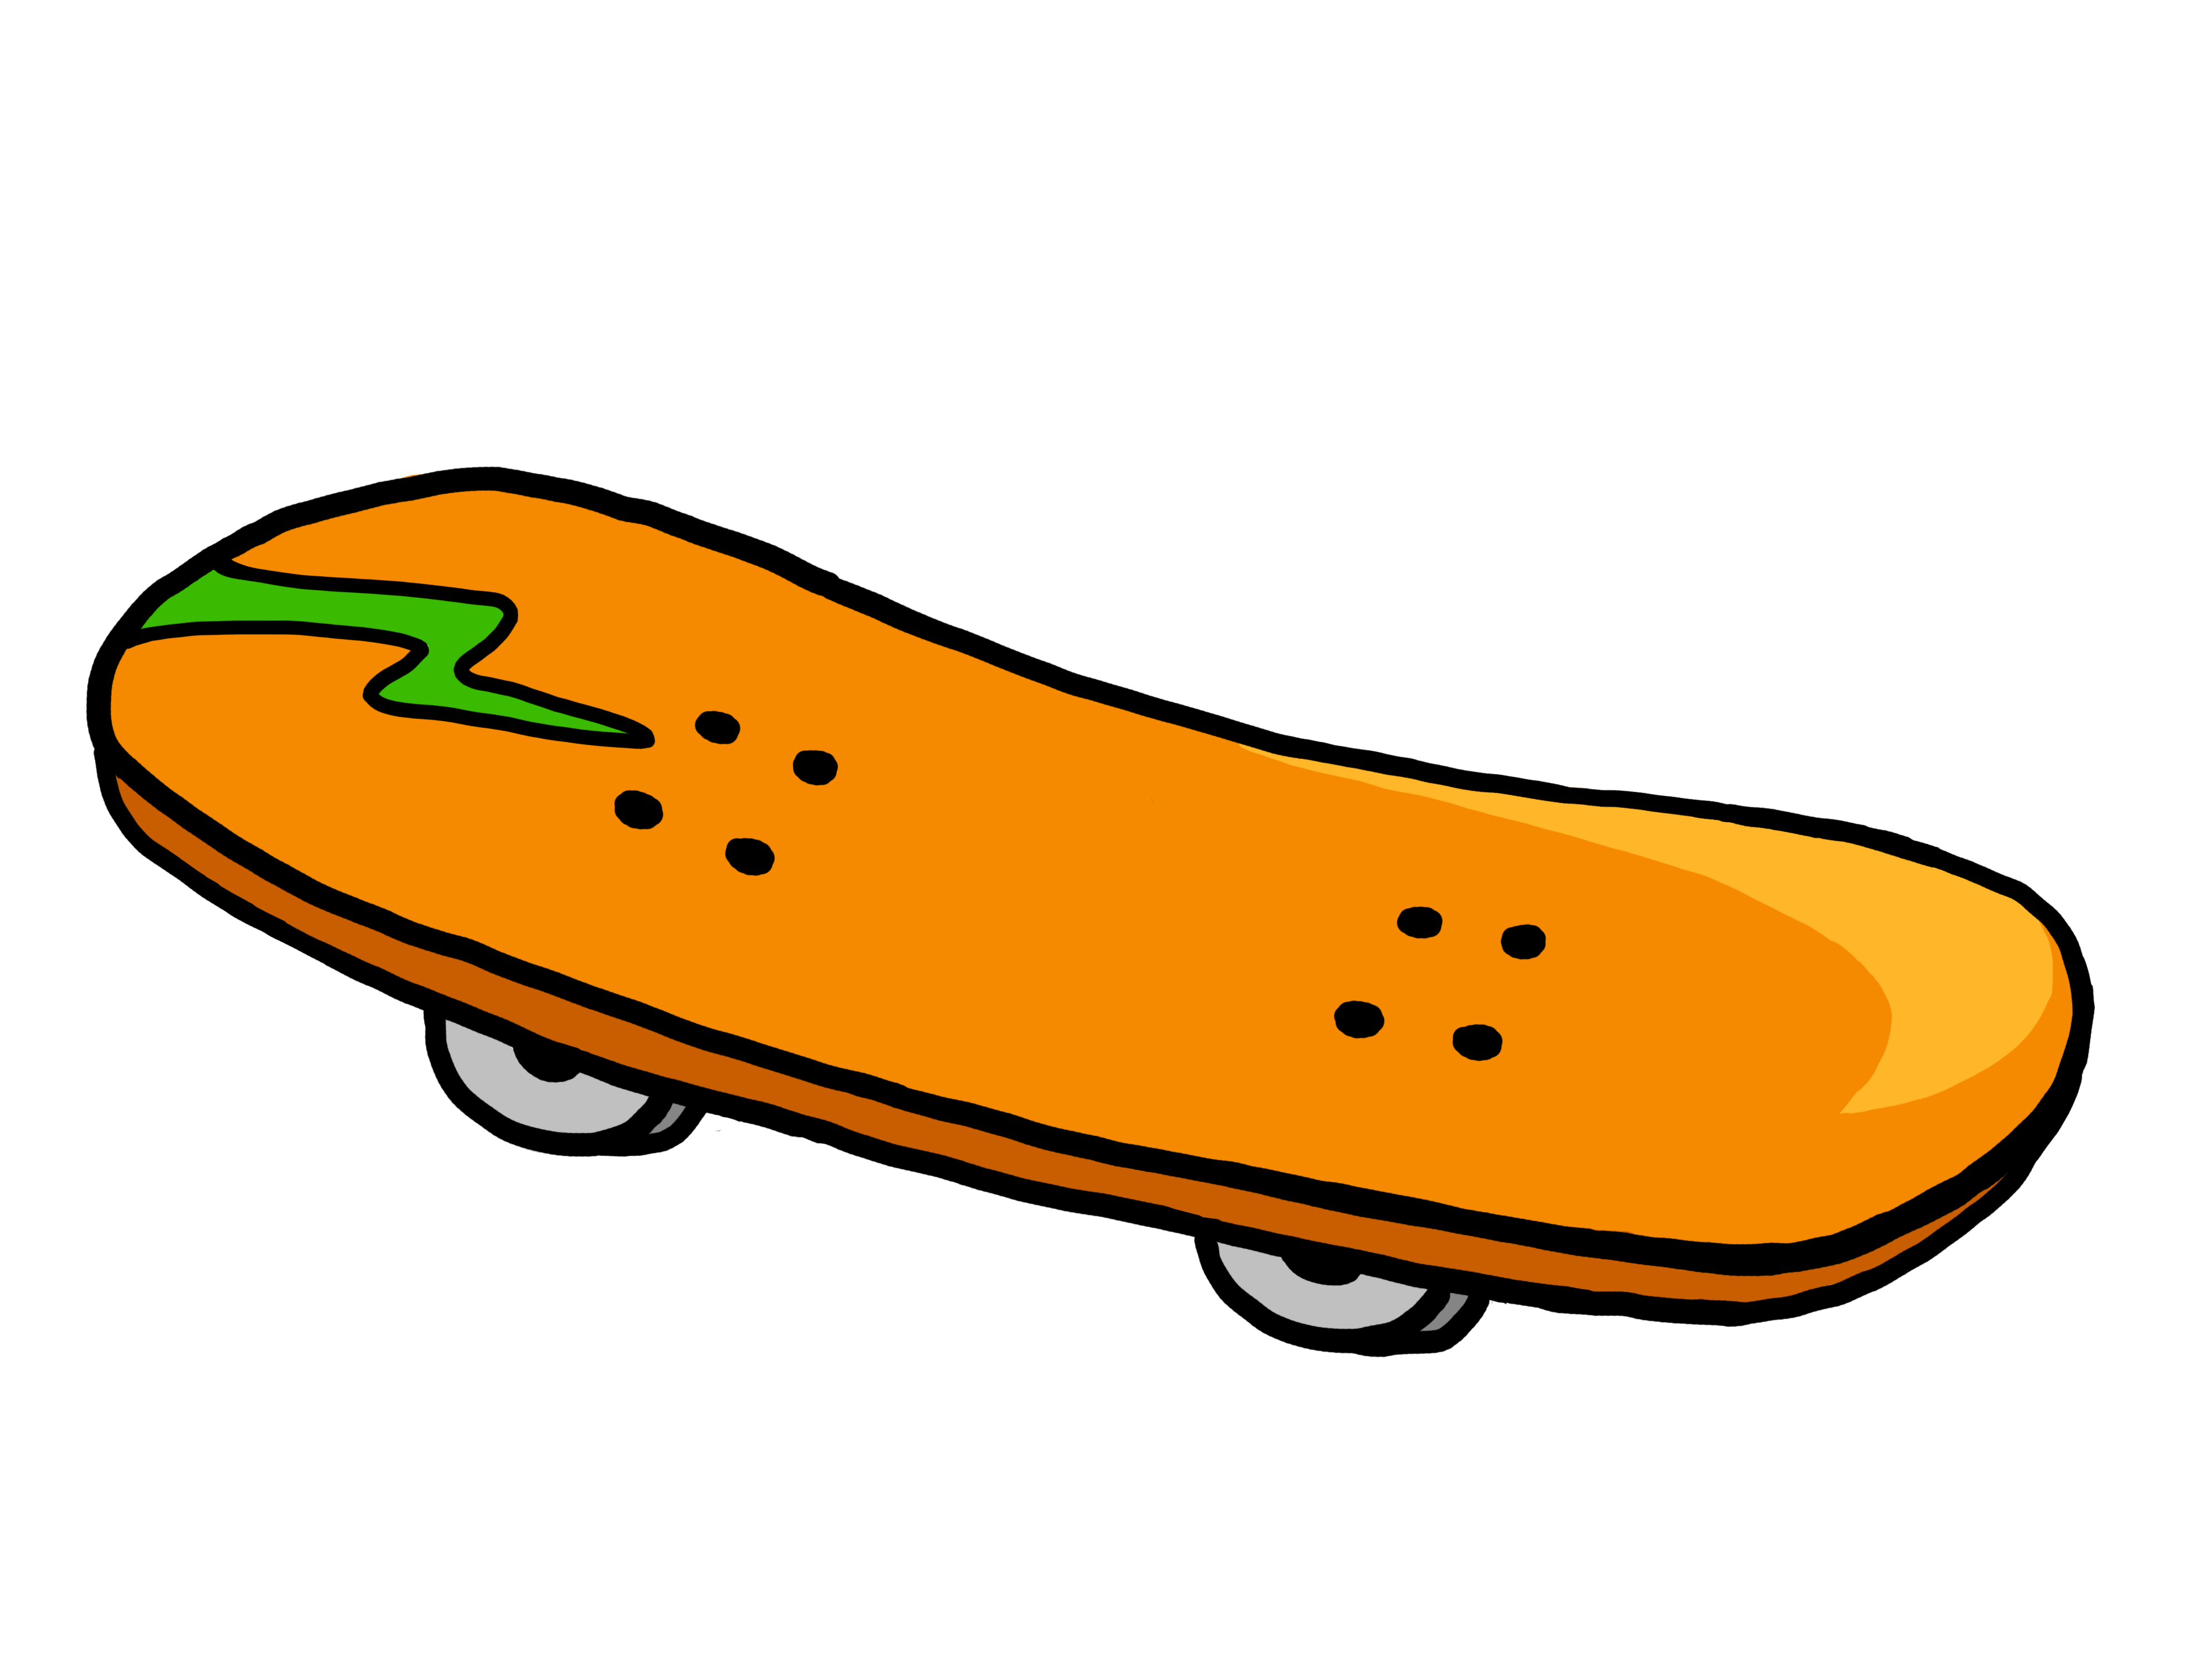 Free Skateboarding Cliparts, Download Free Clip Art, Free.